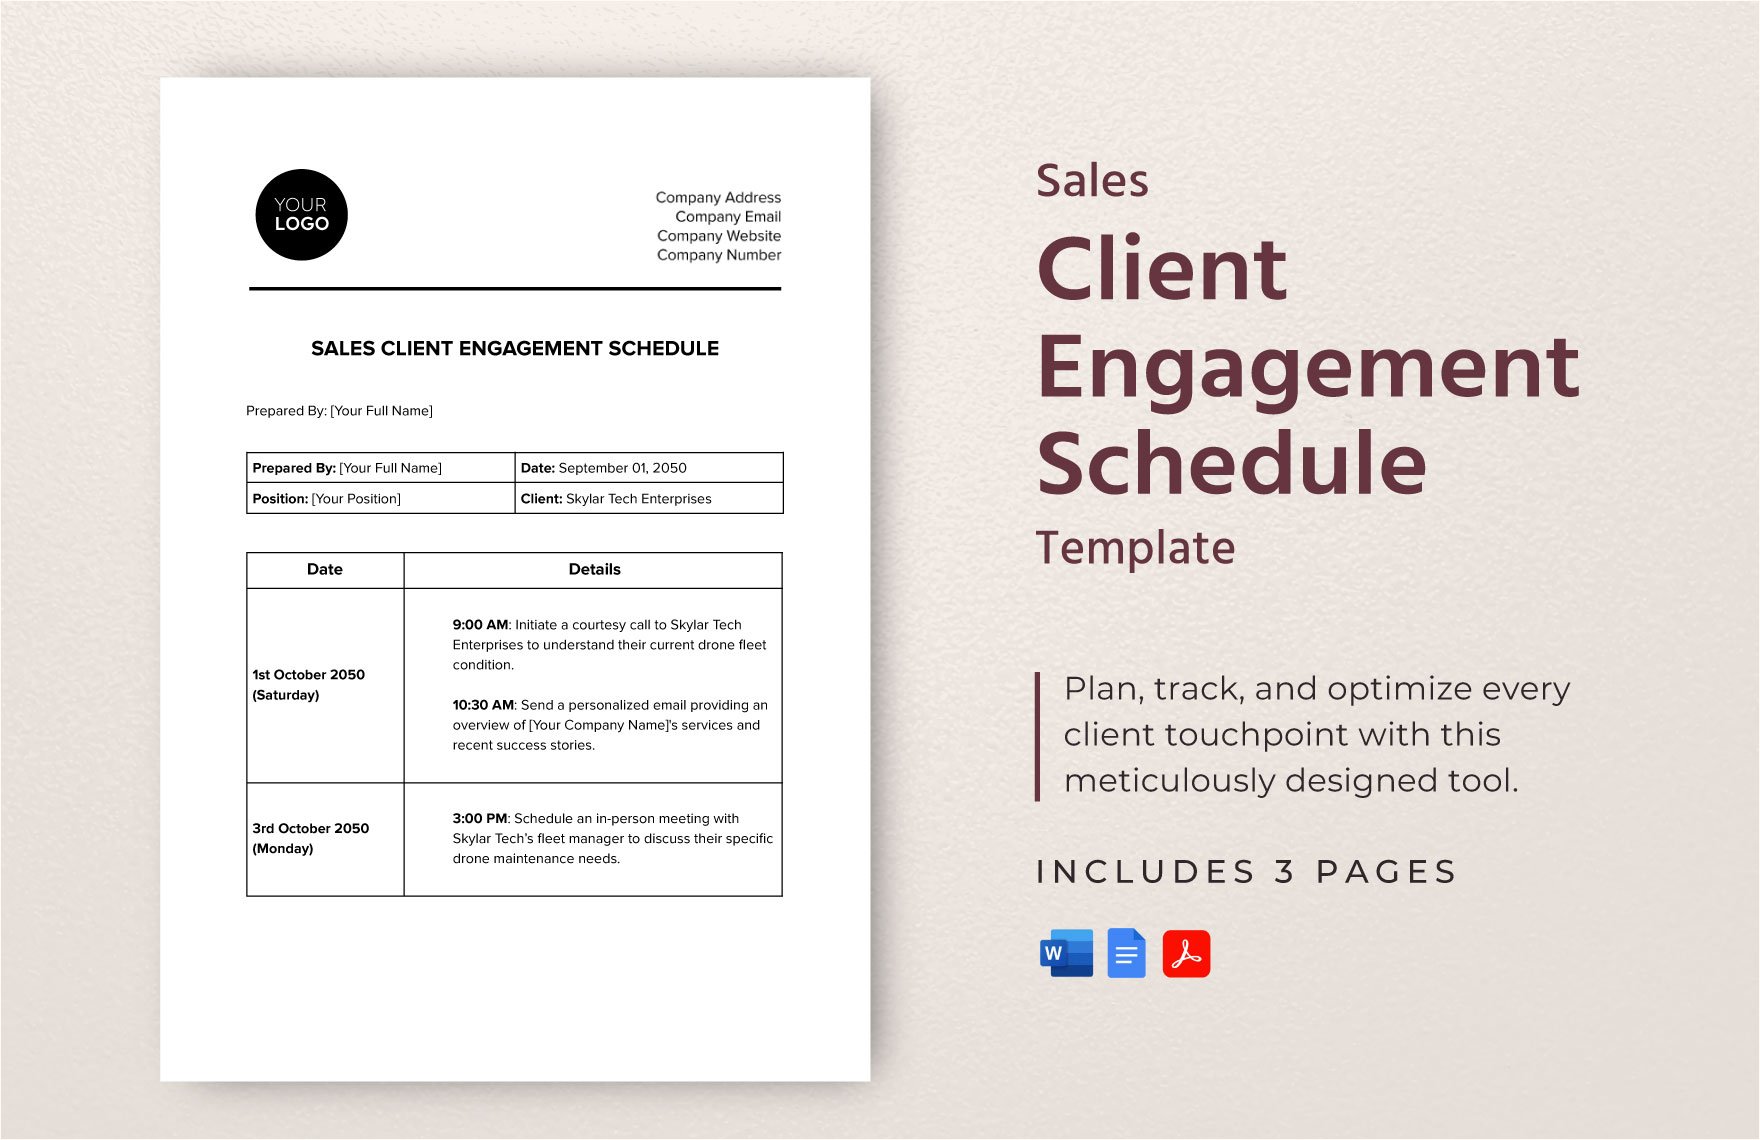 Sales Client Engagement Schedule Template in Word, Google Docs, PDF